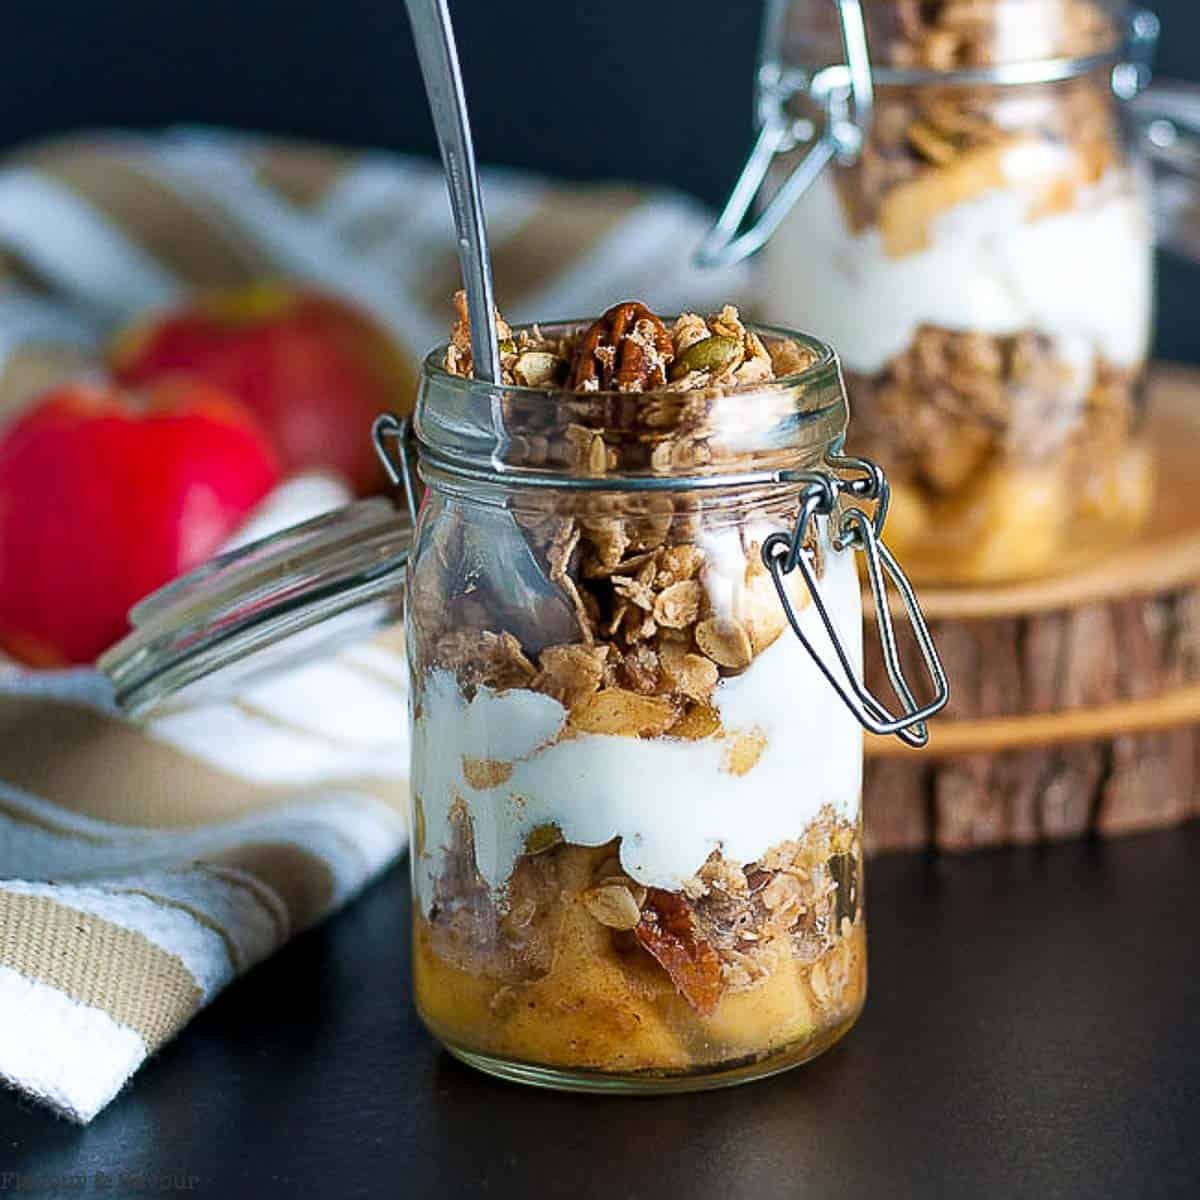 Close up view of a jar with apple crumble breakfast parfait, with layers of caramelized apples, granola and yogurt.